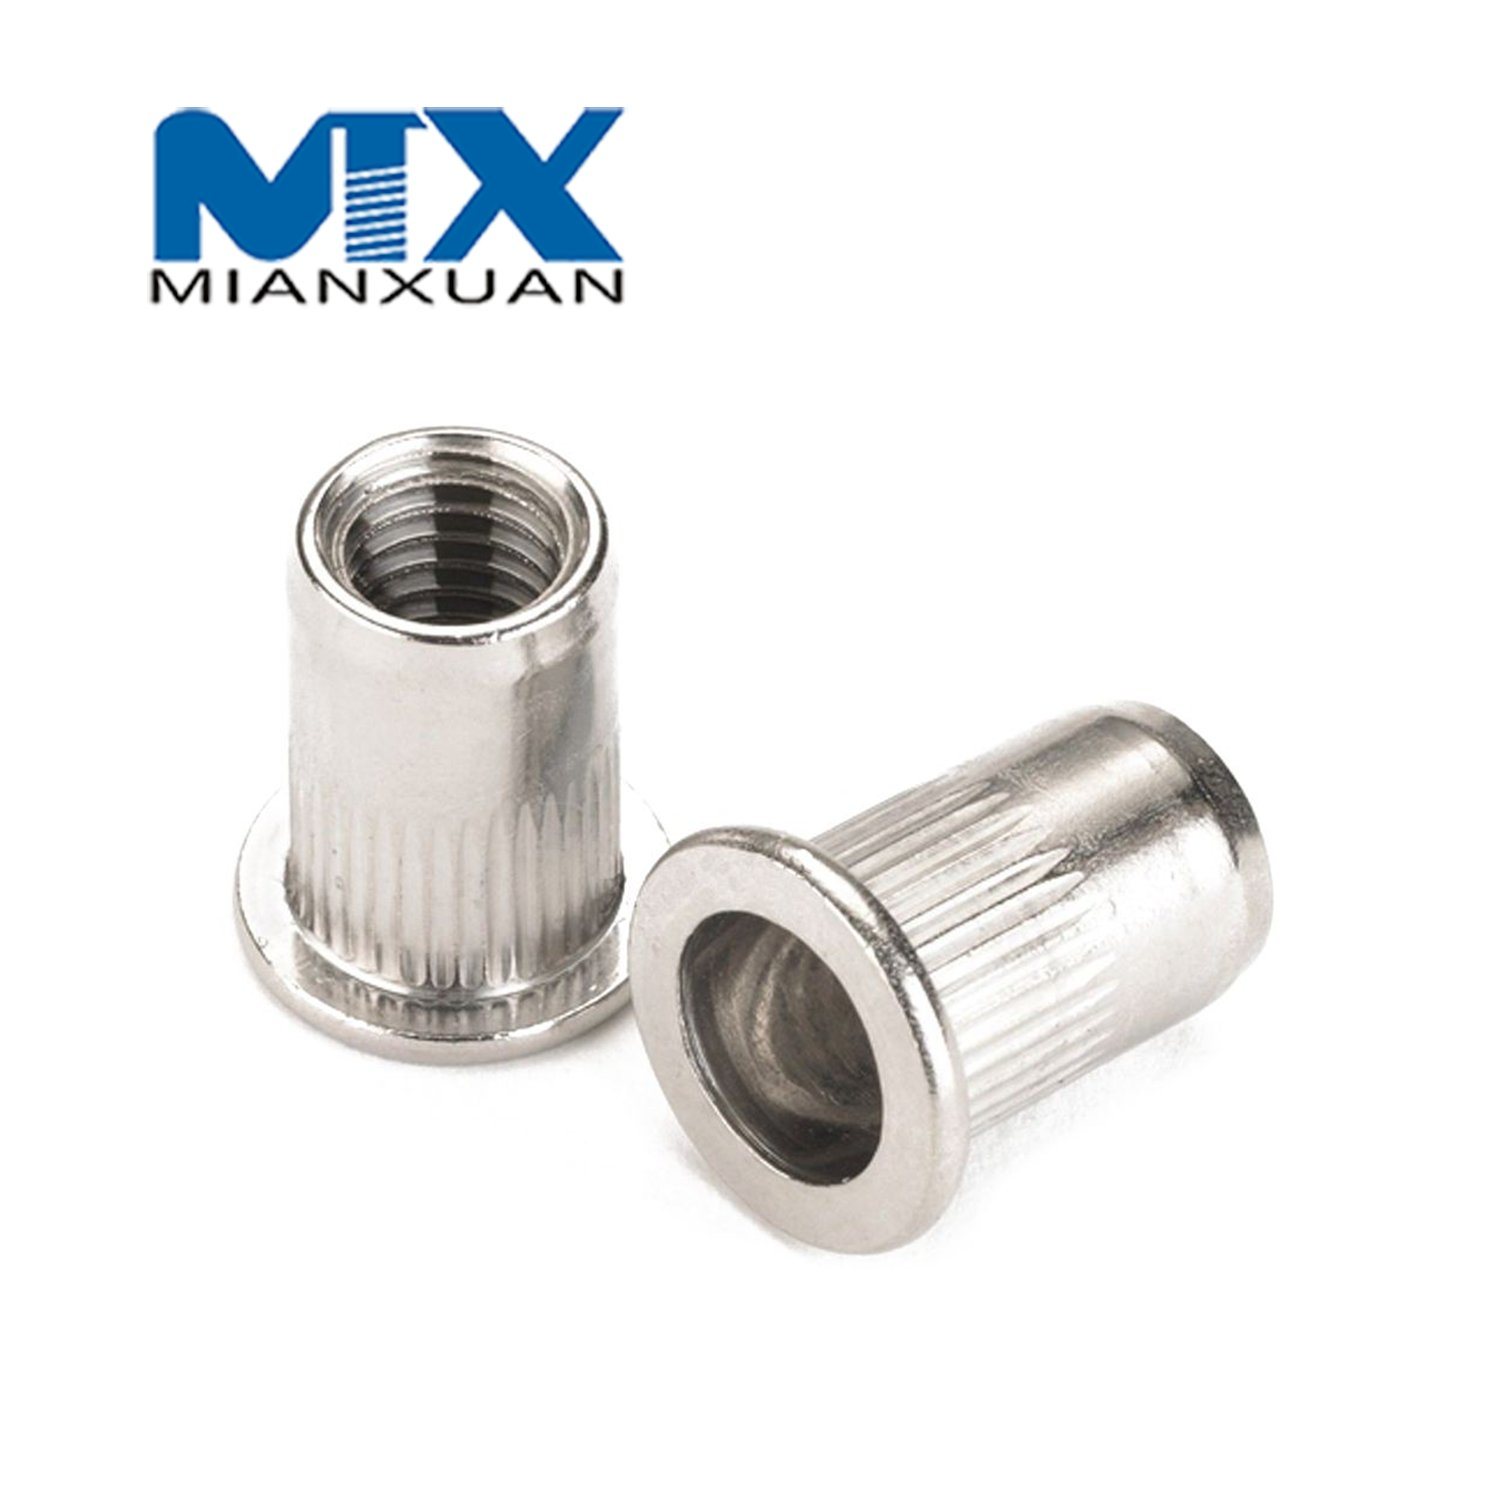 OEM ODM High Quality Free Samples Fastener Rivet Nut Supplier From China